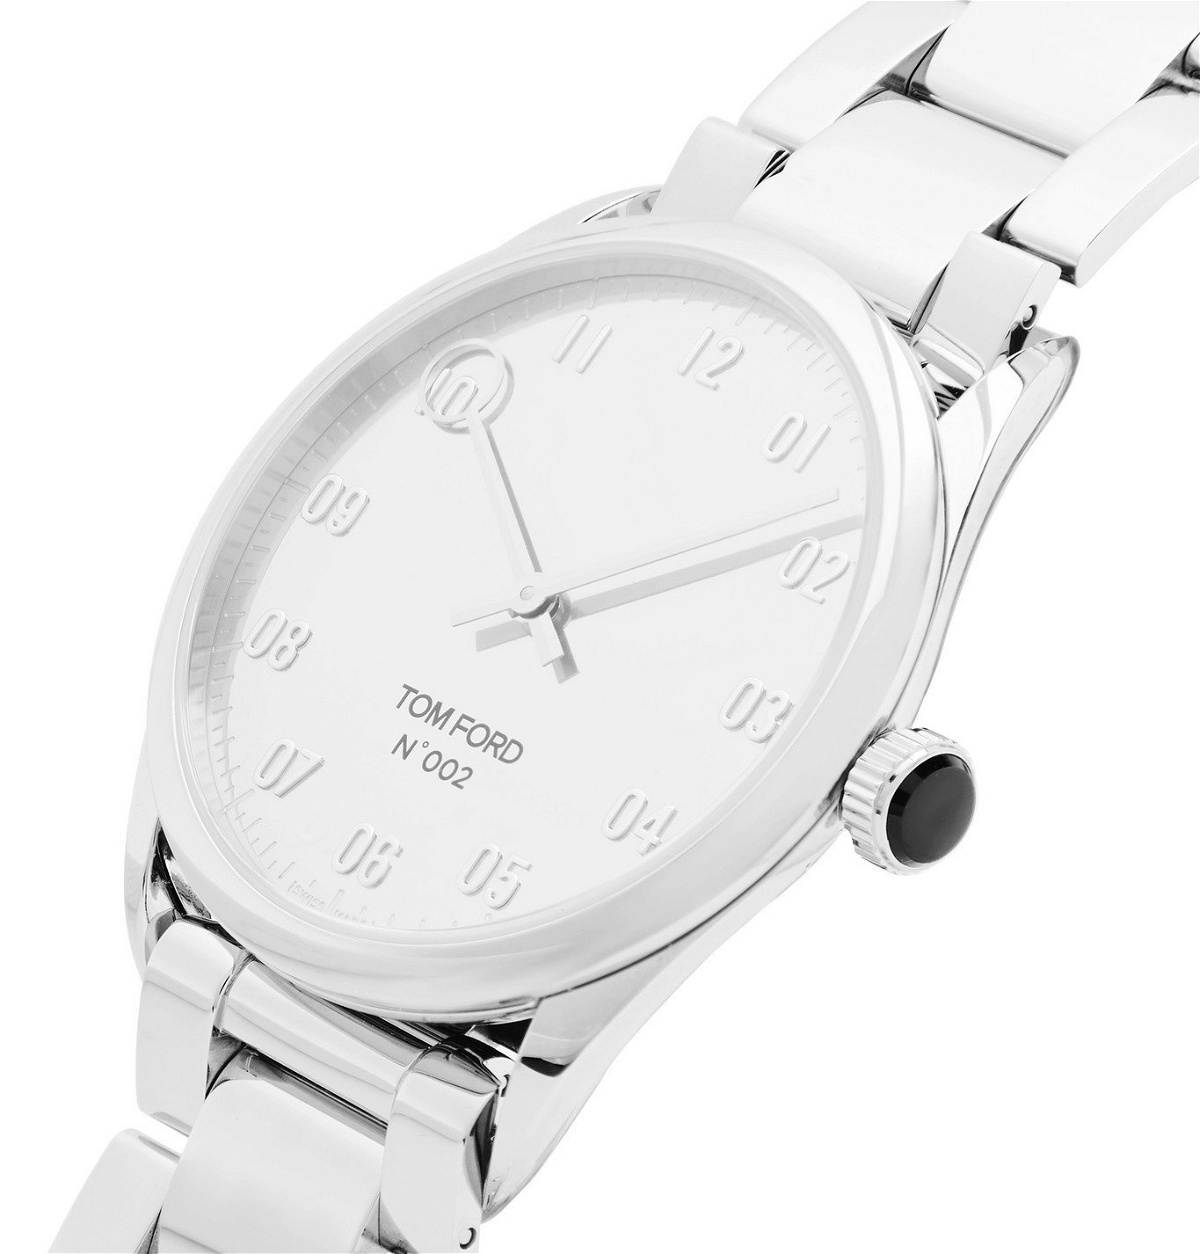 Tom Ford Timepieces - 002 38mm Stainless Steel Watch - Silver Tom